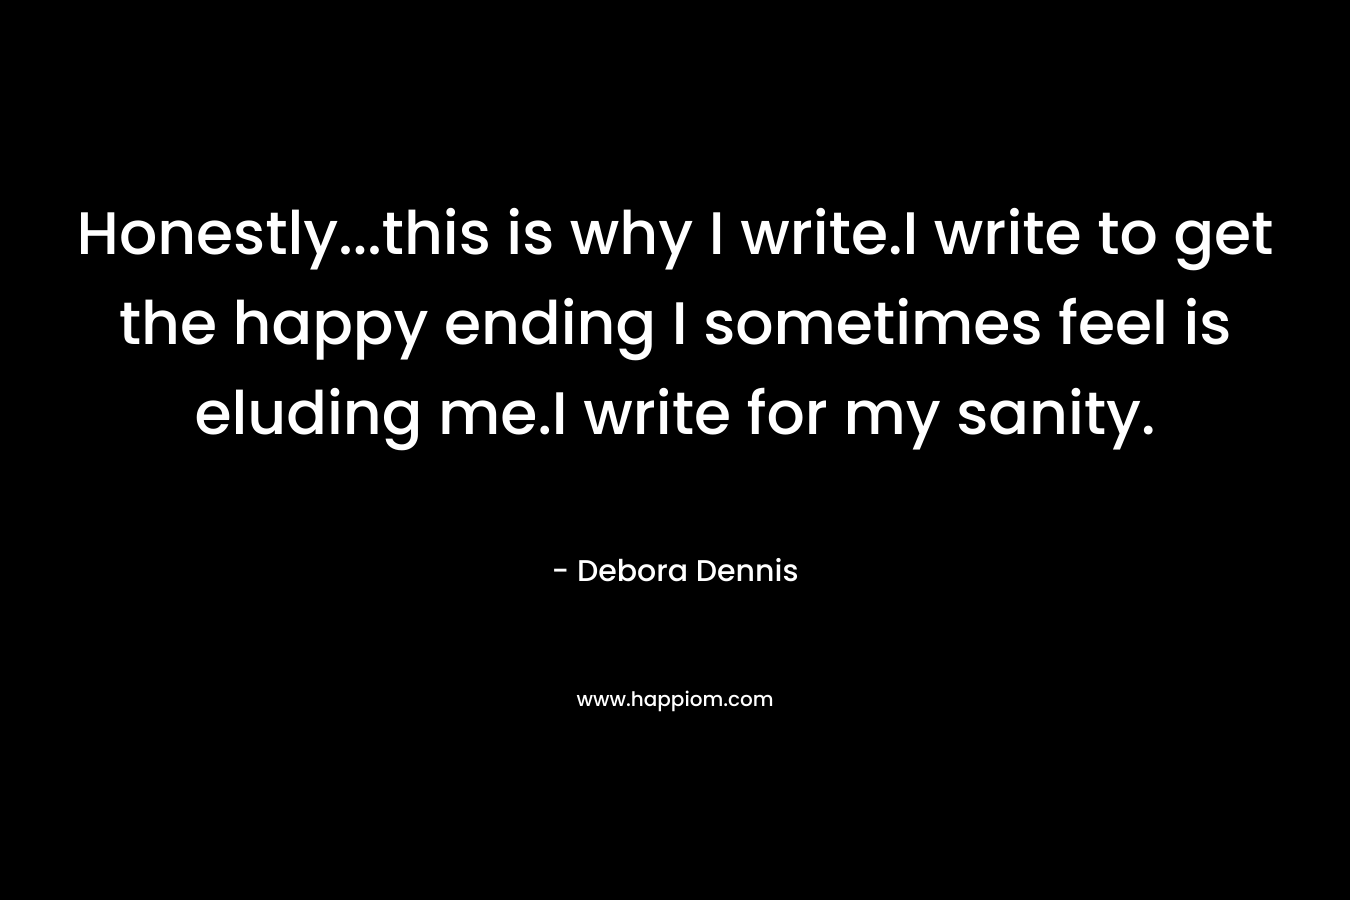 Honestly…this is why I write.I write to get the happy ending I sometimes feel is eluding me.I write for my sanity. – Debora Dennis